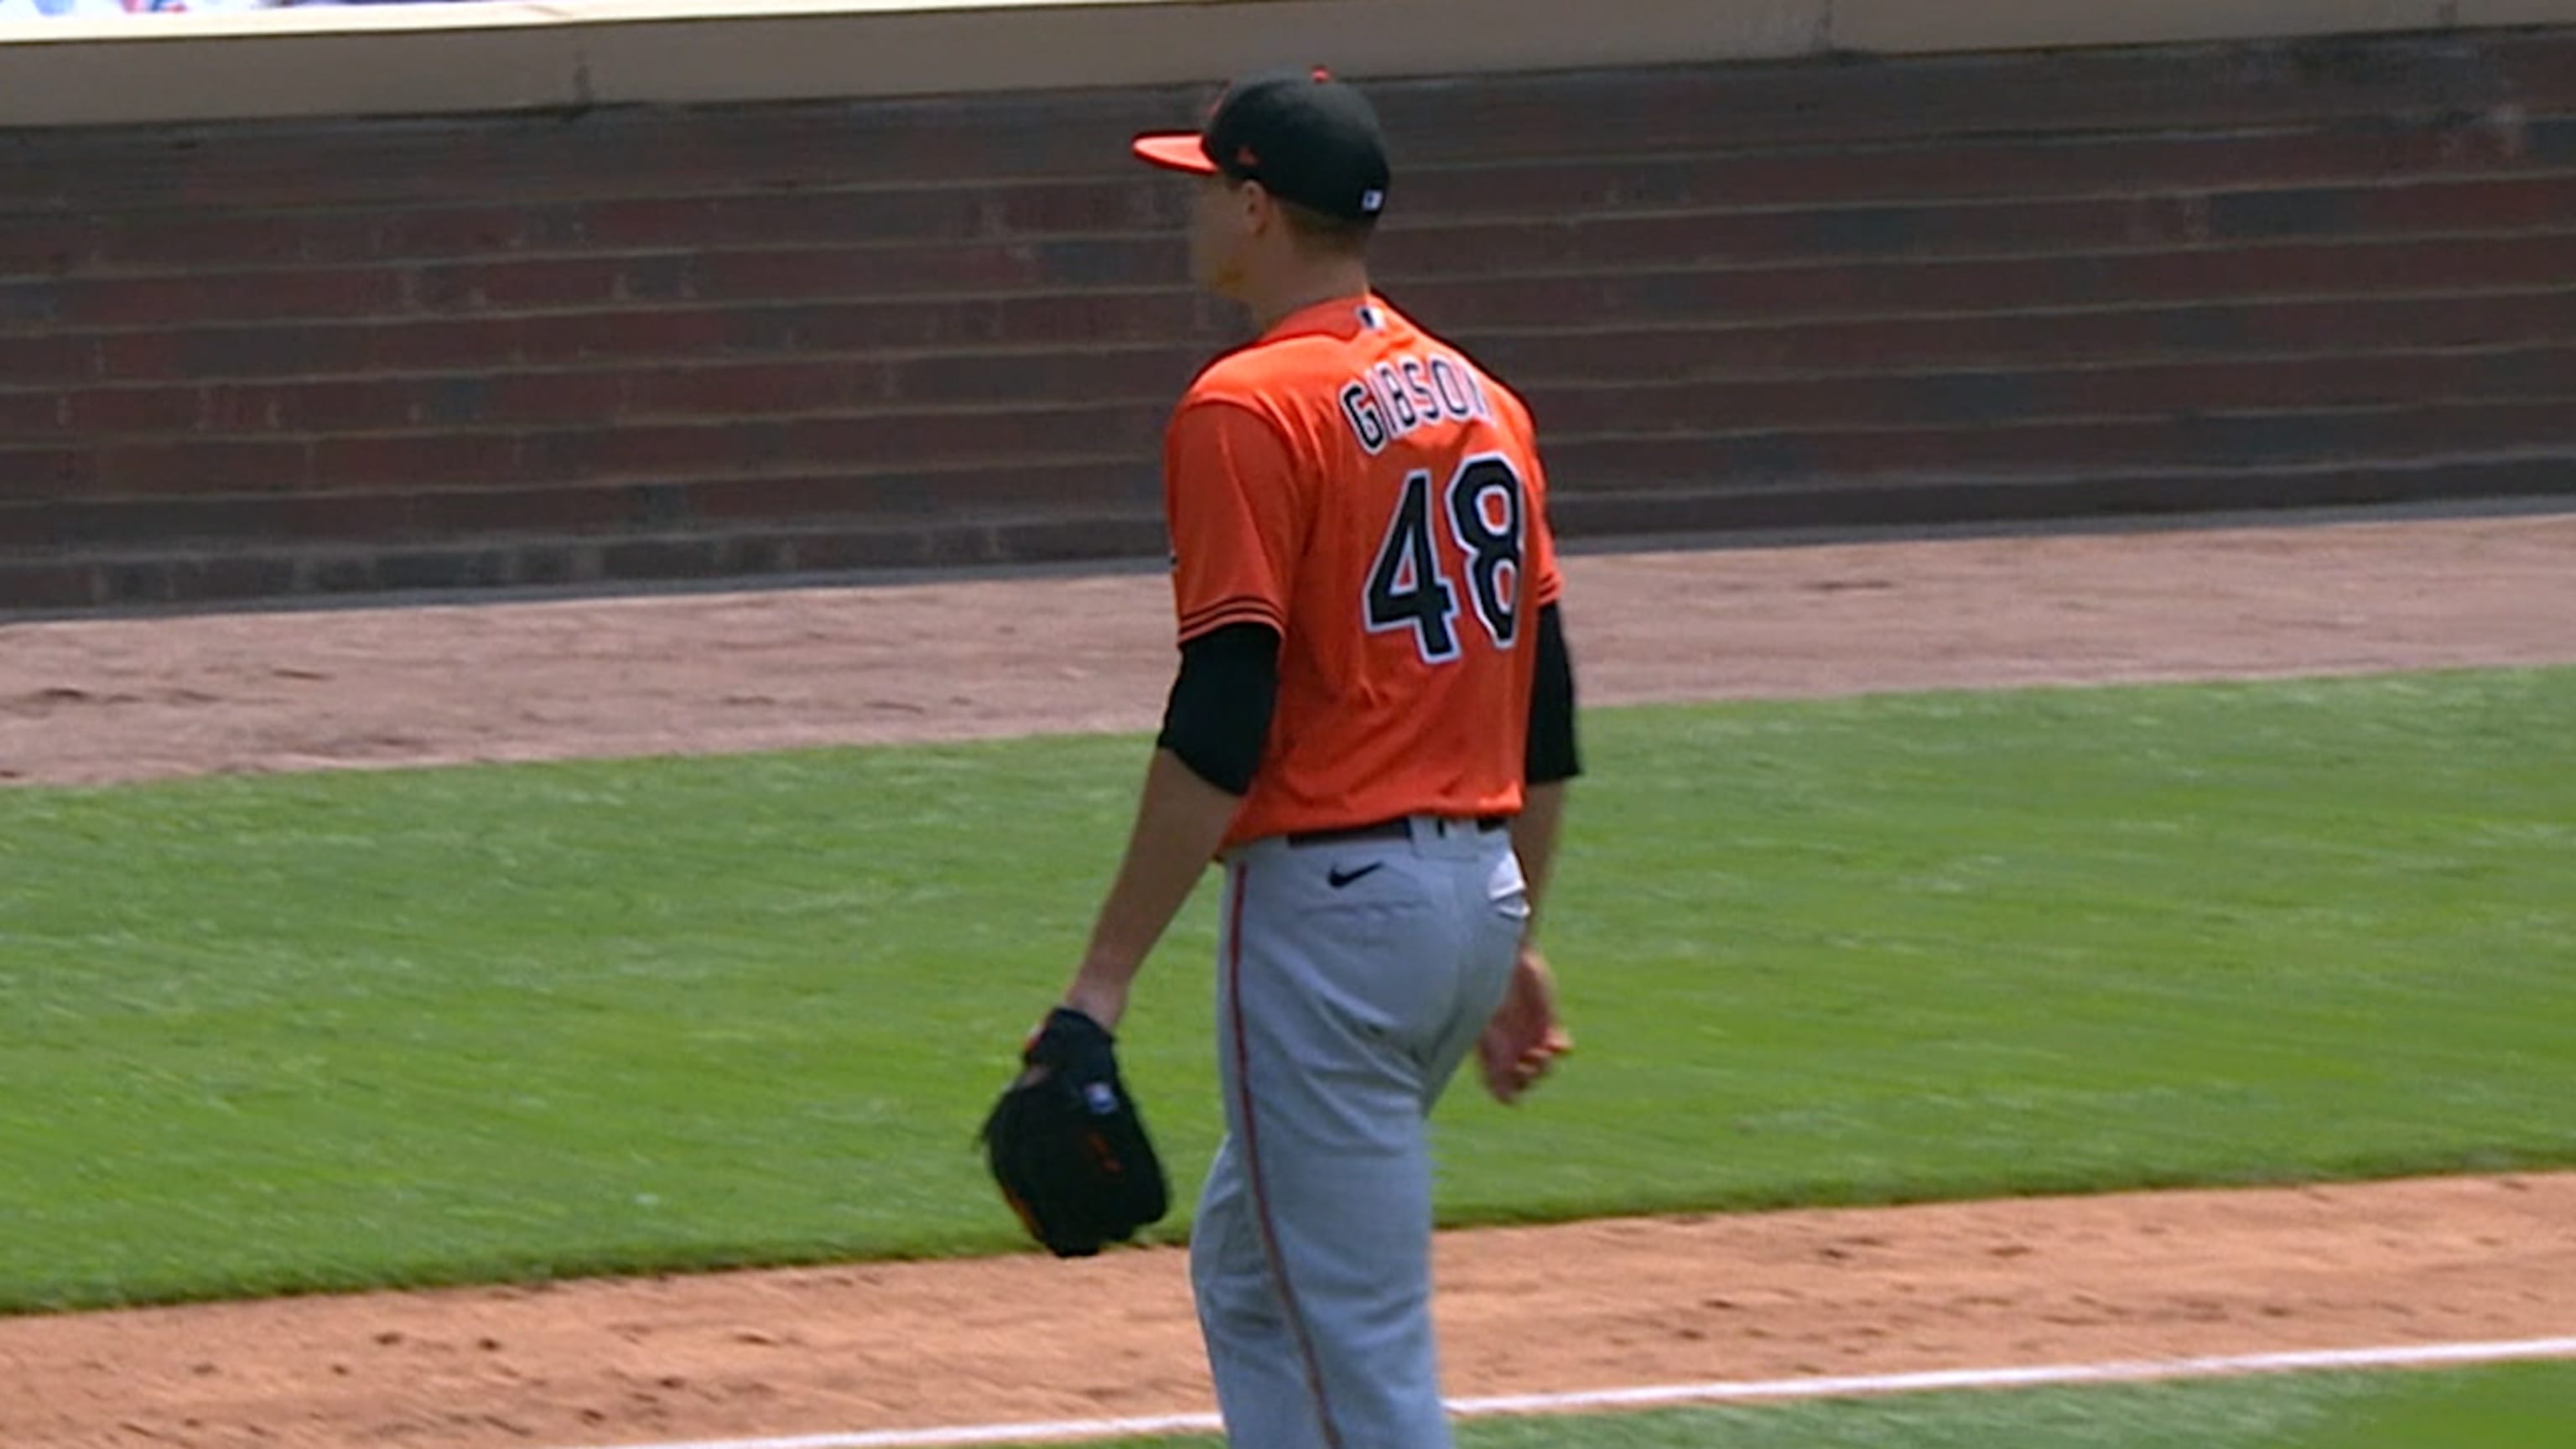 Rookie Rutschman leads Orioles past hobbled White Sox 4-0 - The